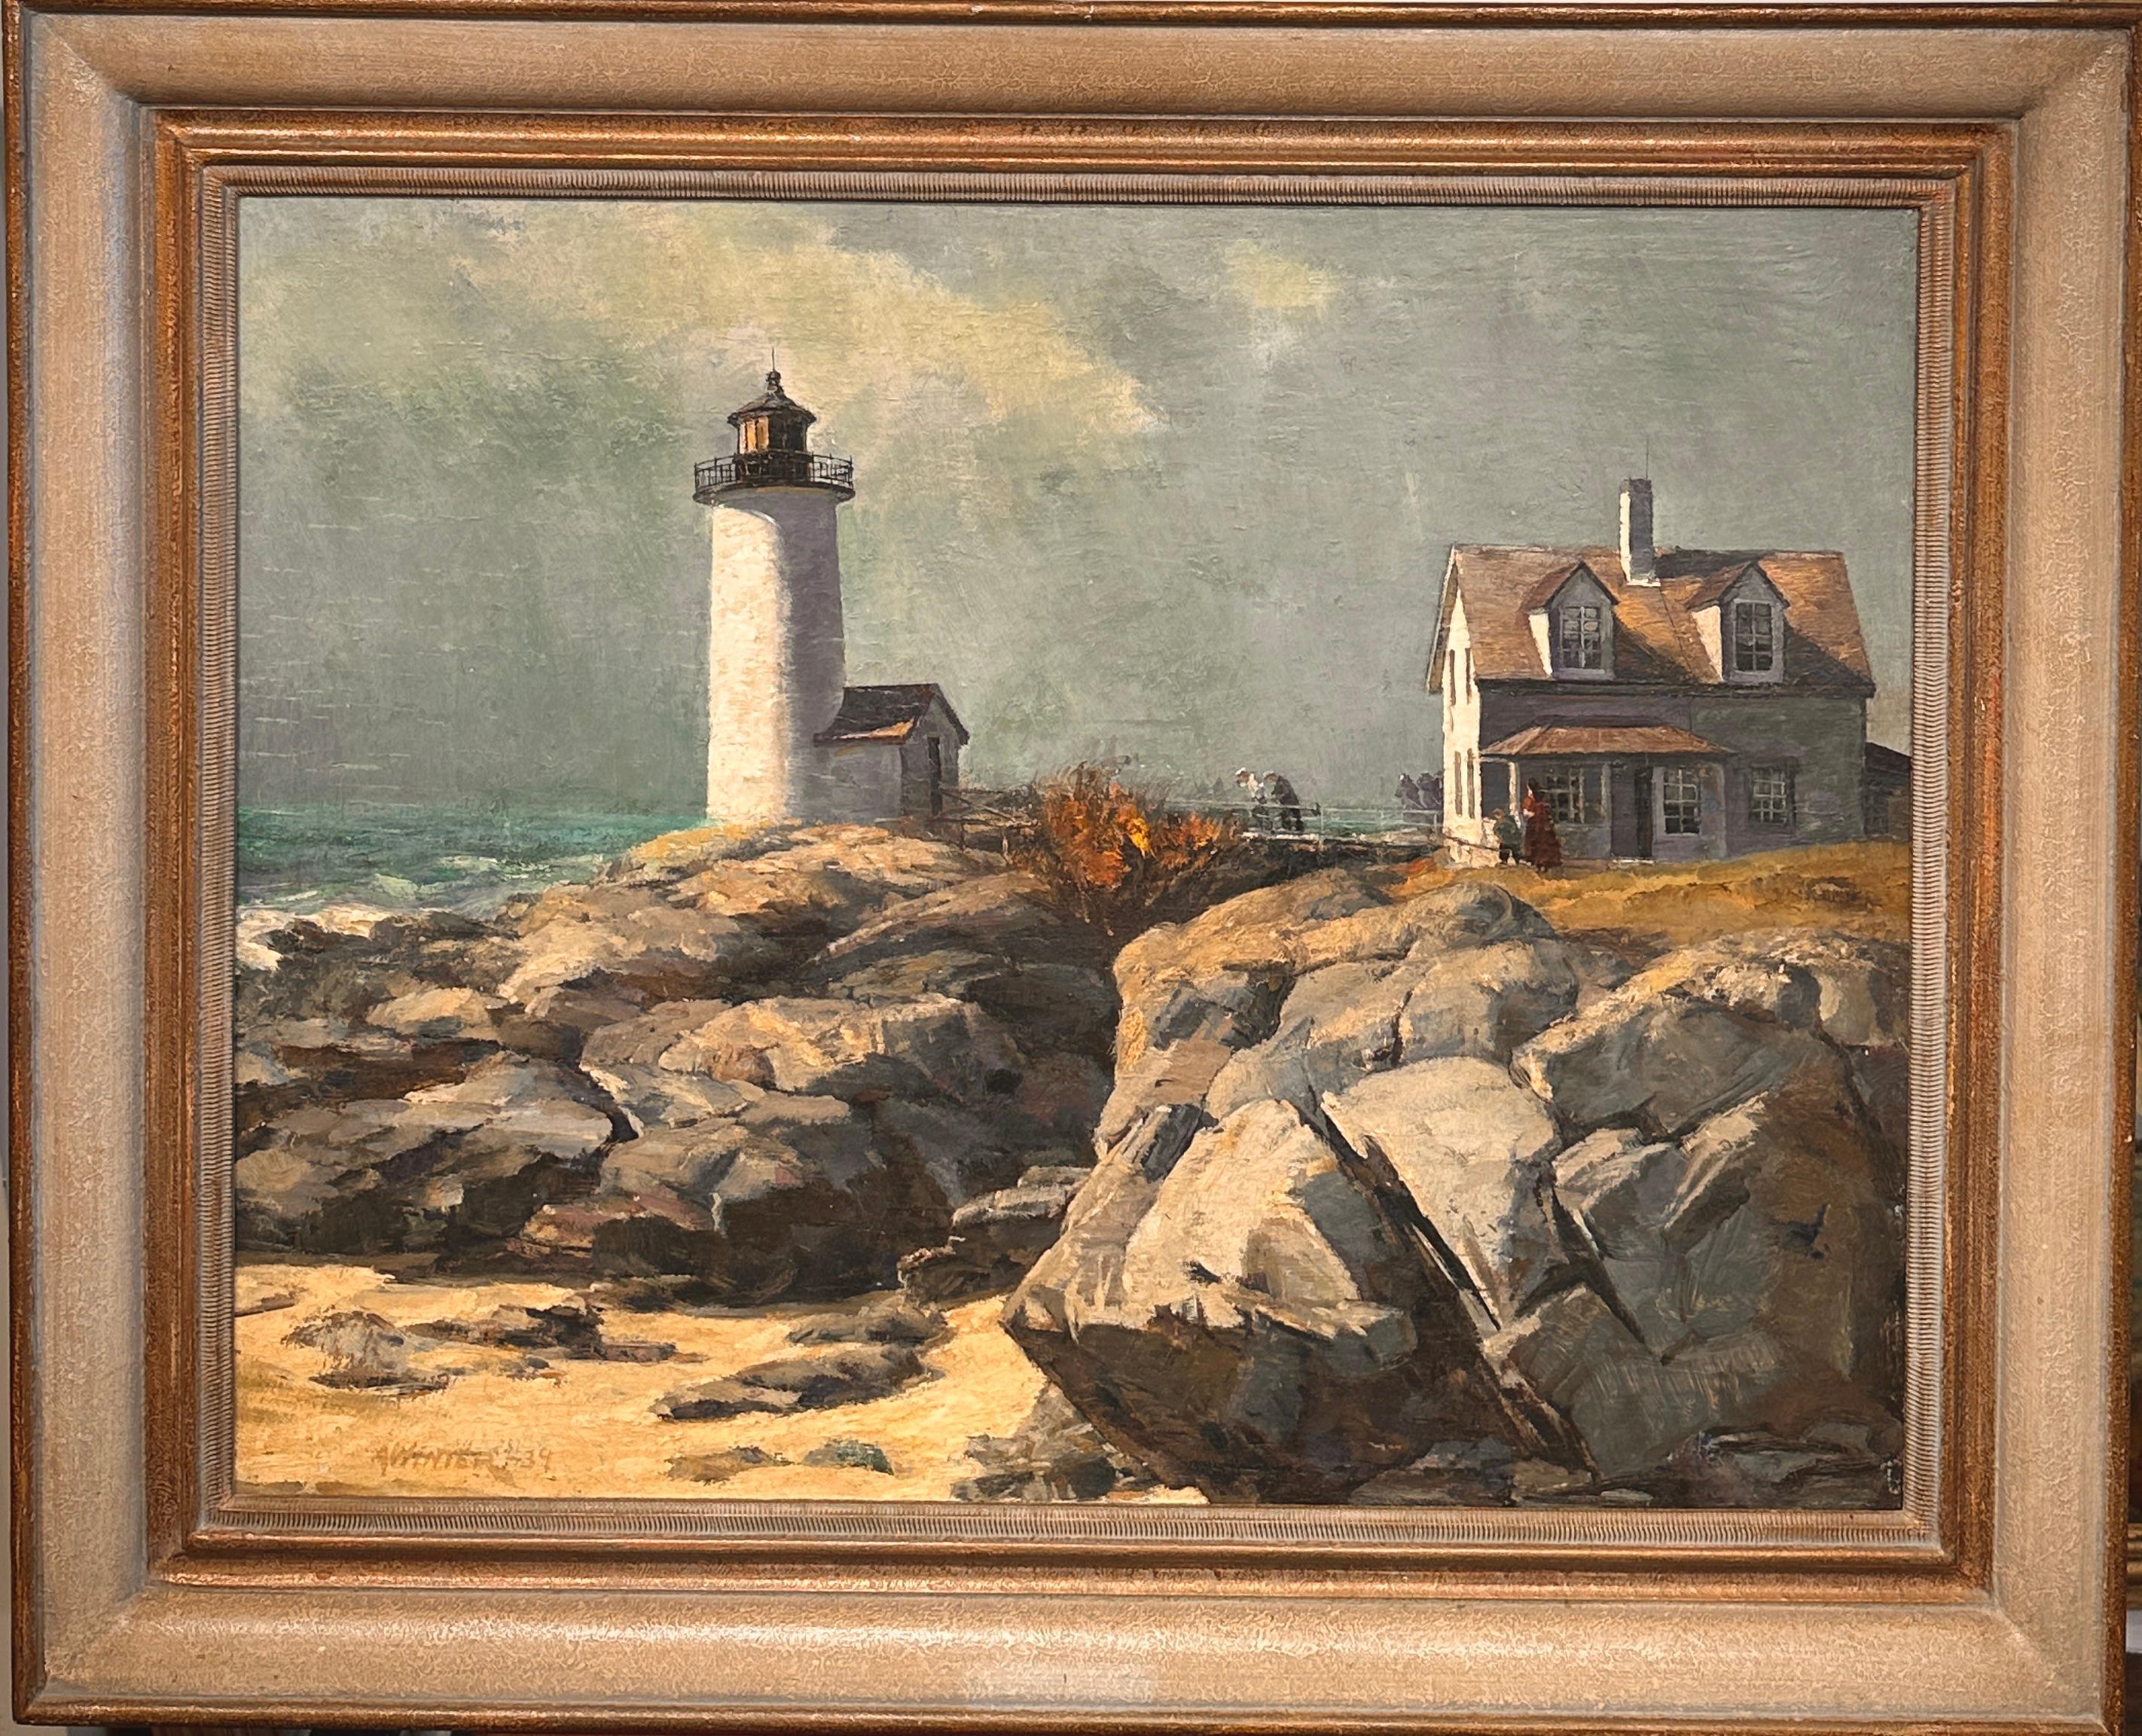 Easterly Wind, Annisquam Light 1939, Coastal Seascape Scene, Lighthouse - Painting by Andrew Winter